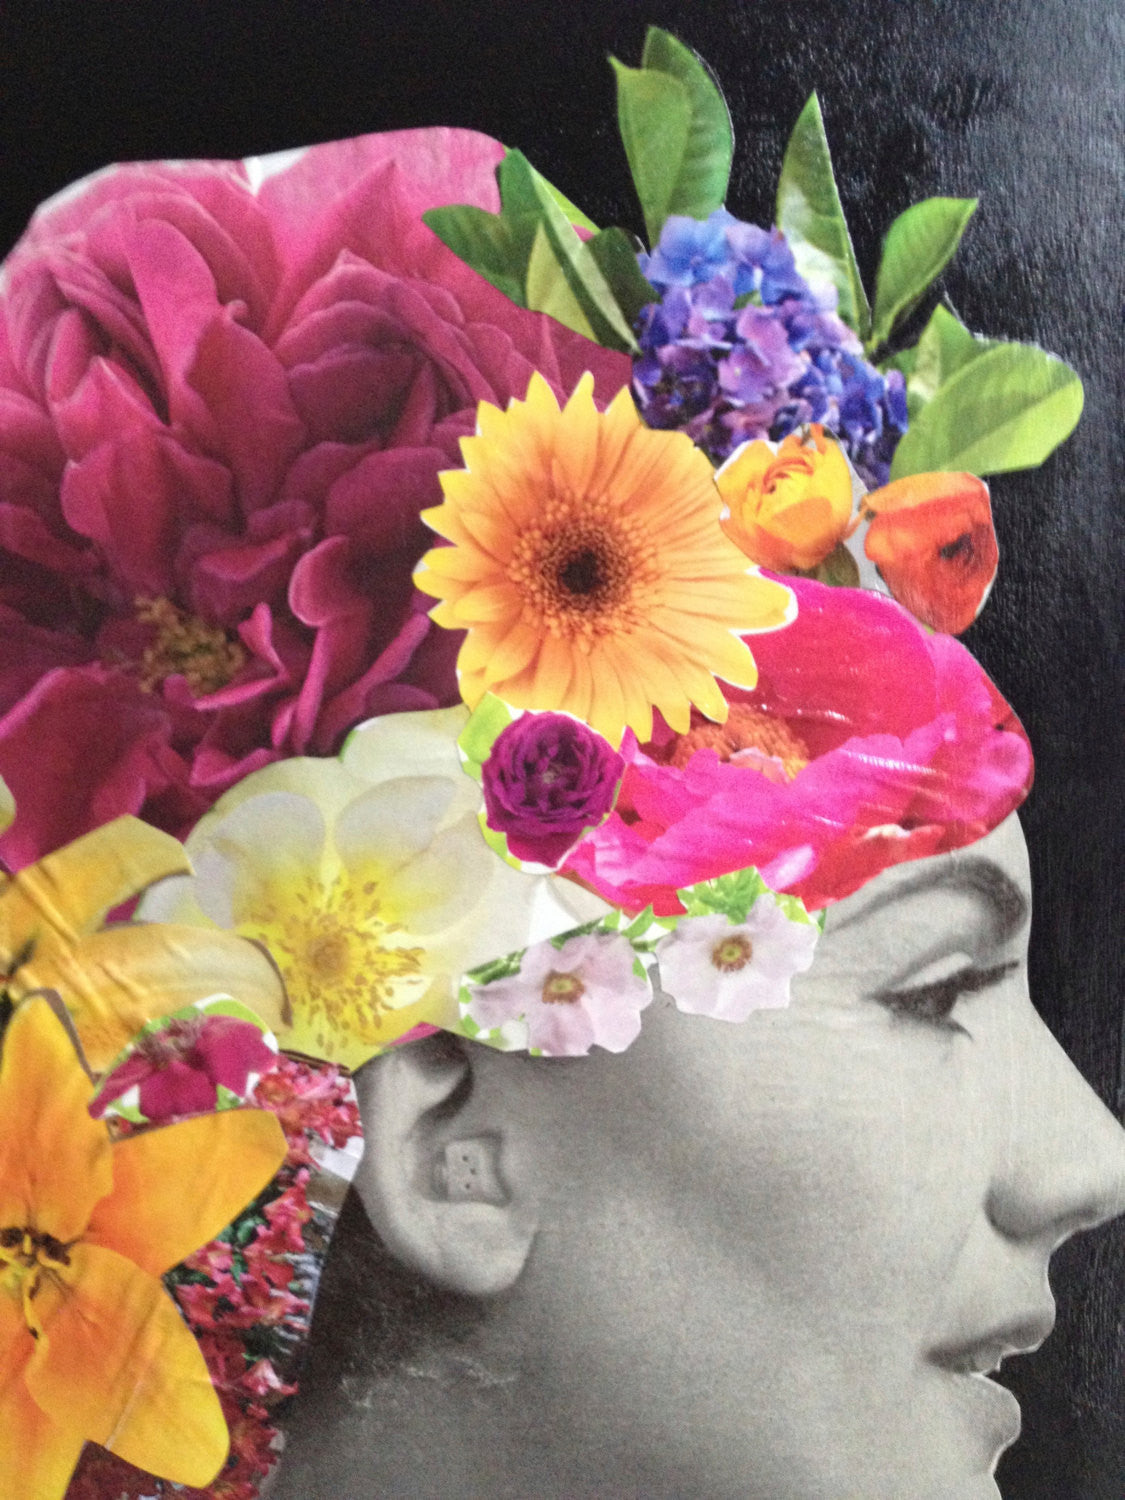 "Lady with Flowers in Her Hair" Original Collage Art